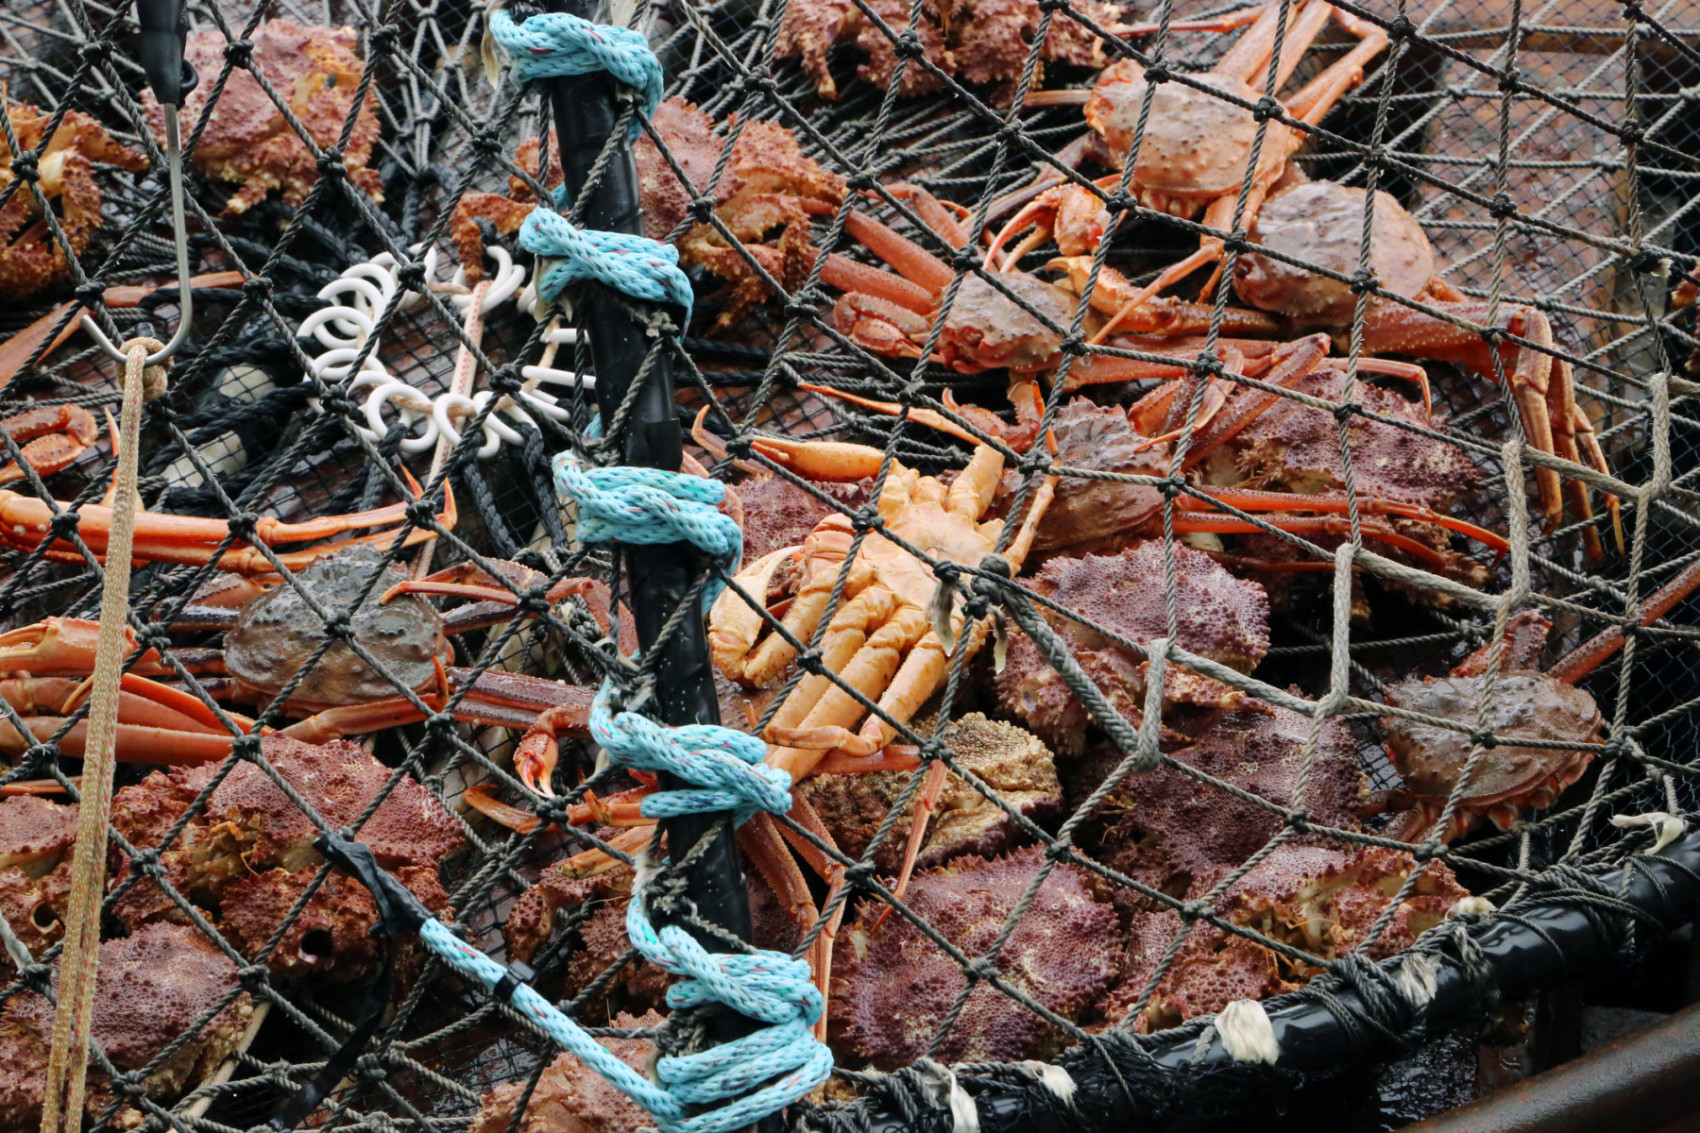 A variety of crabs brought up in the net while out at sea. (Bobby Ware/ iStock/ Getty Images Plus)